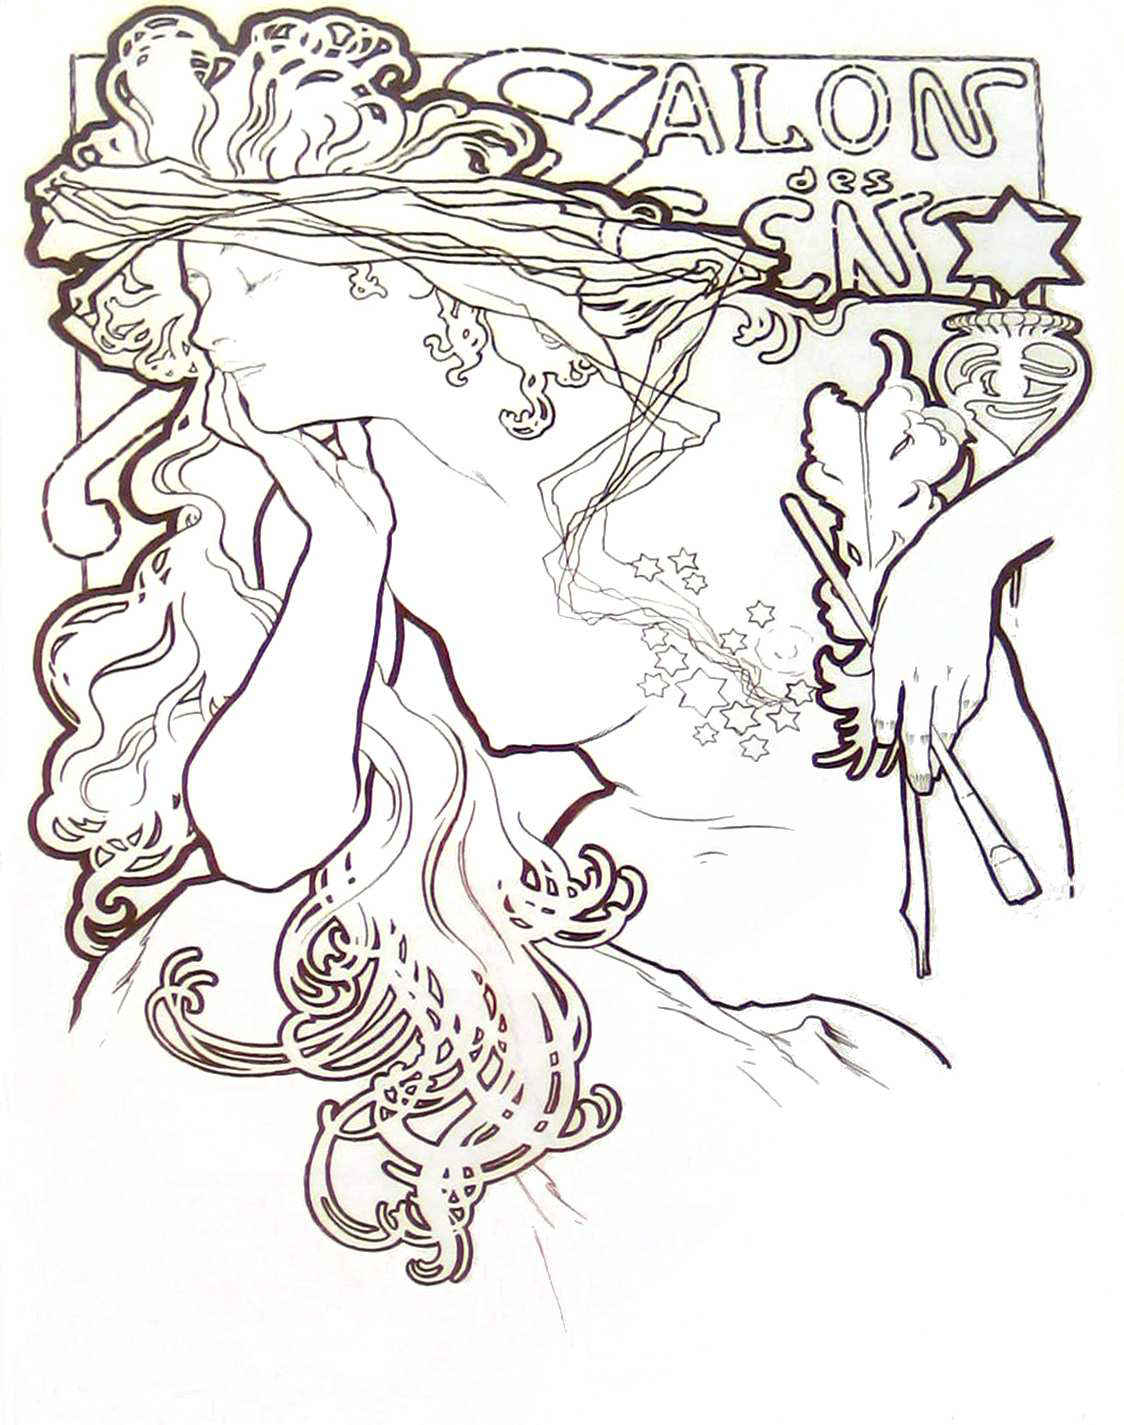 A coloring page of a woman